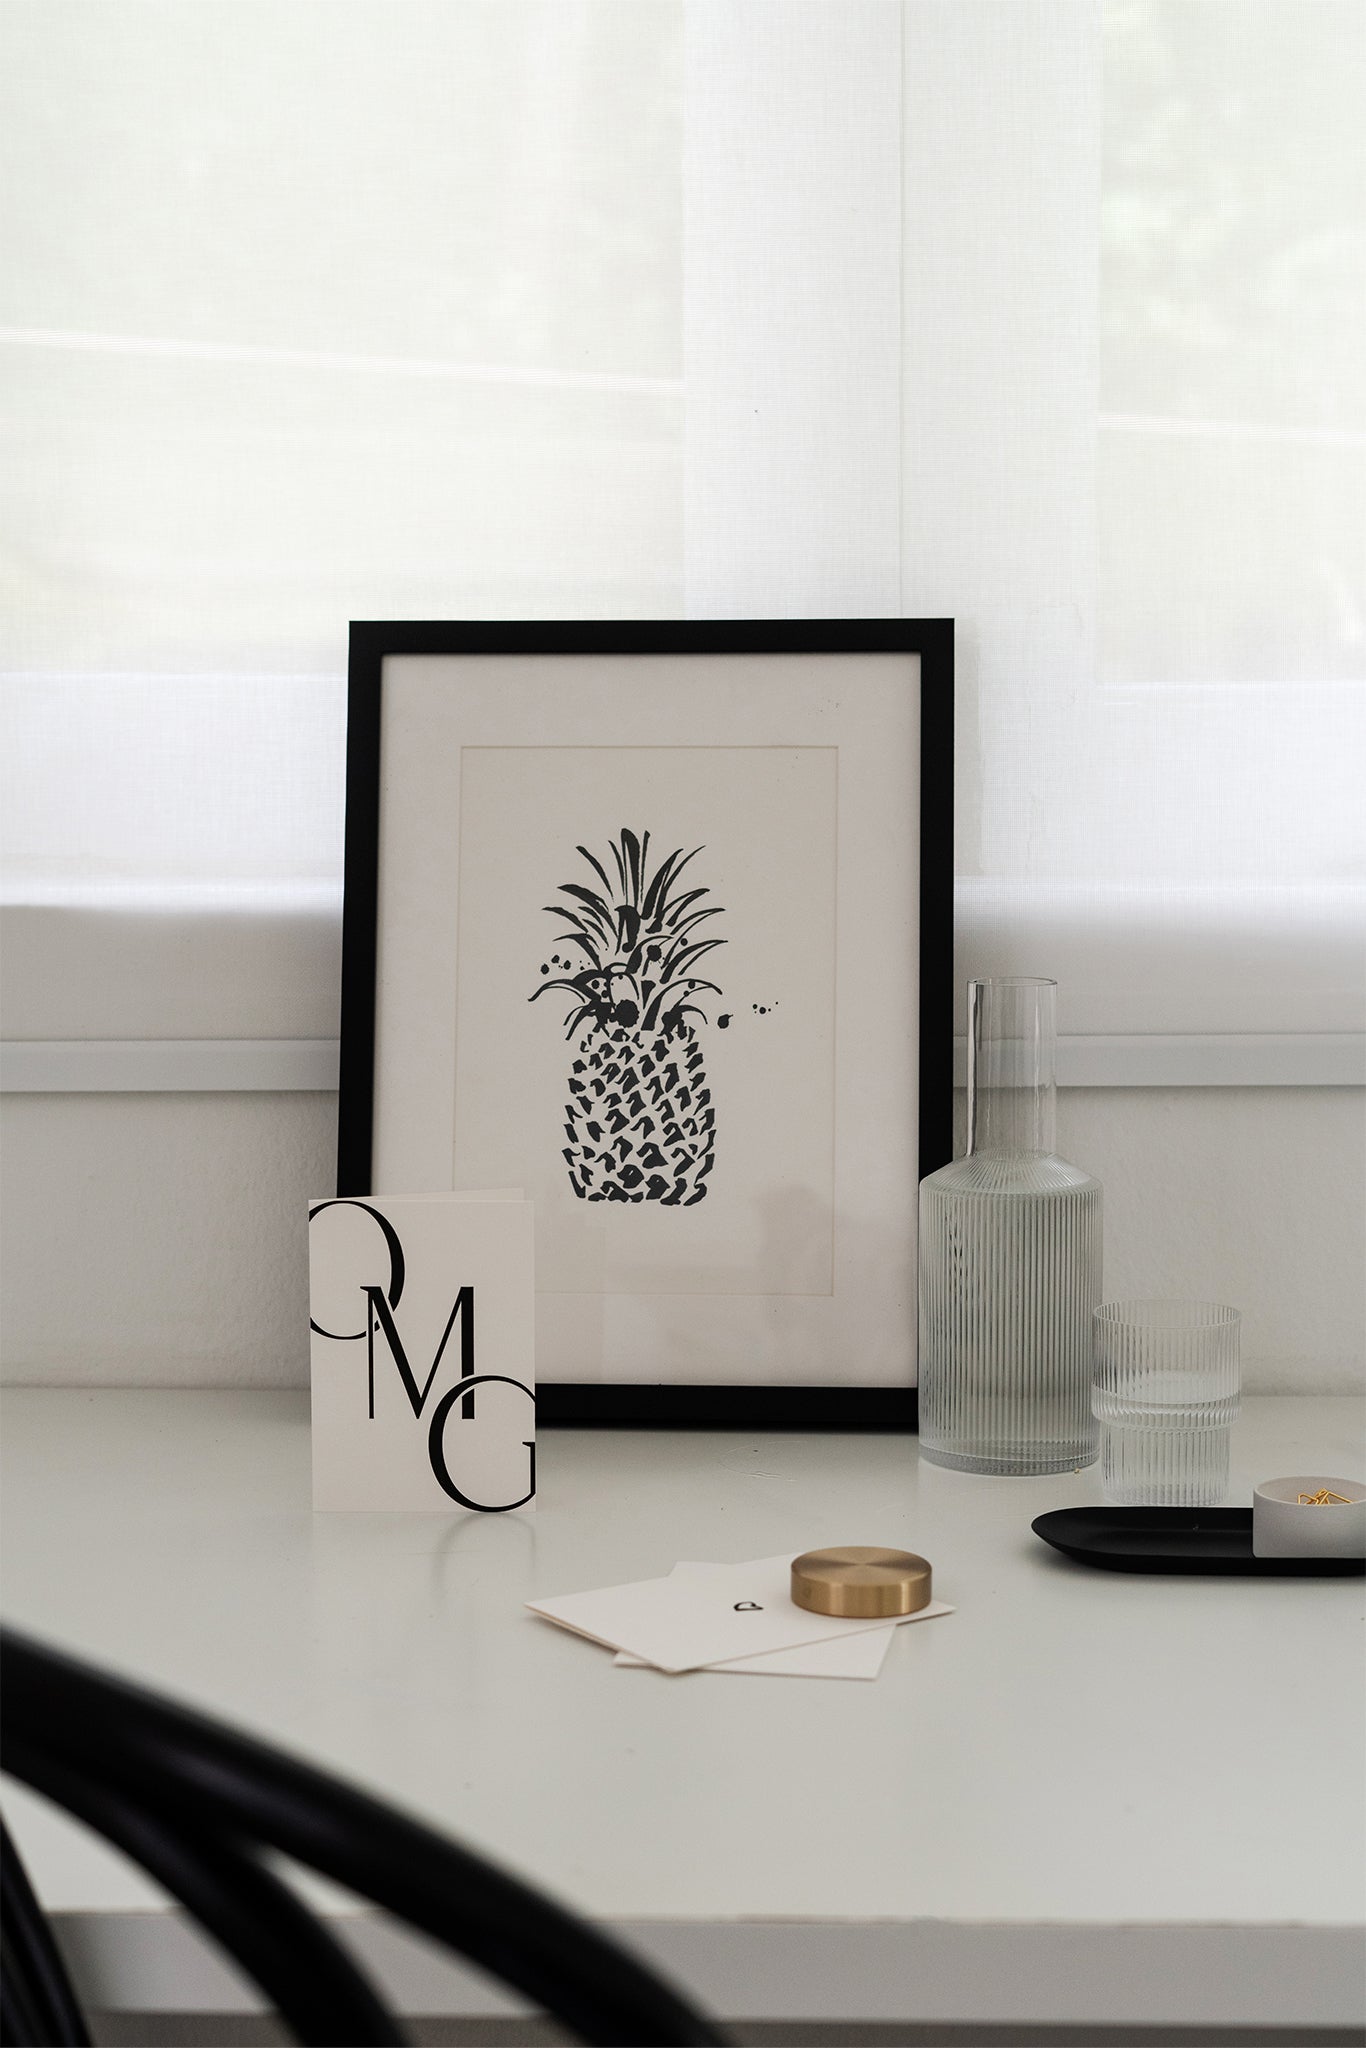 Pineapple, by Fable